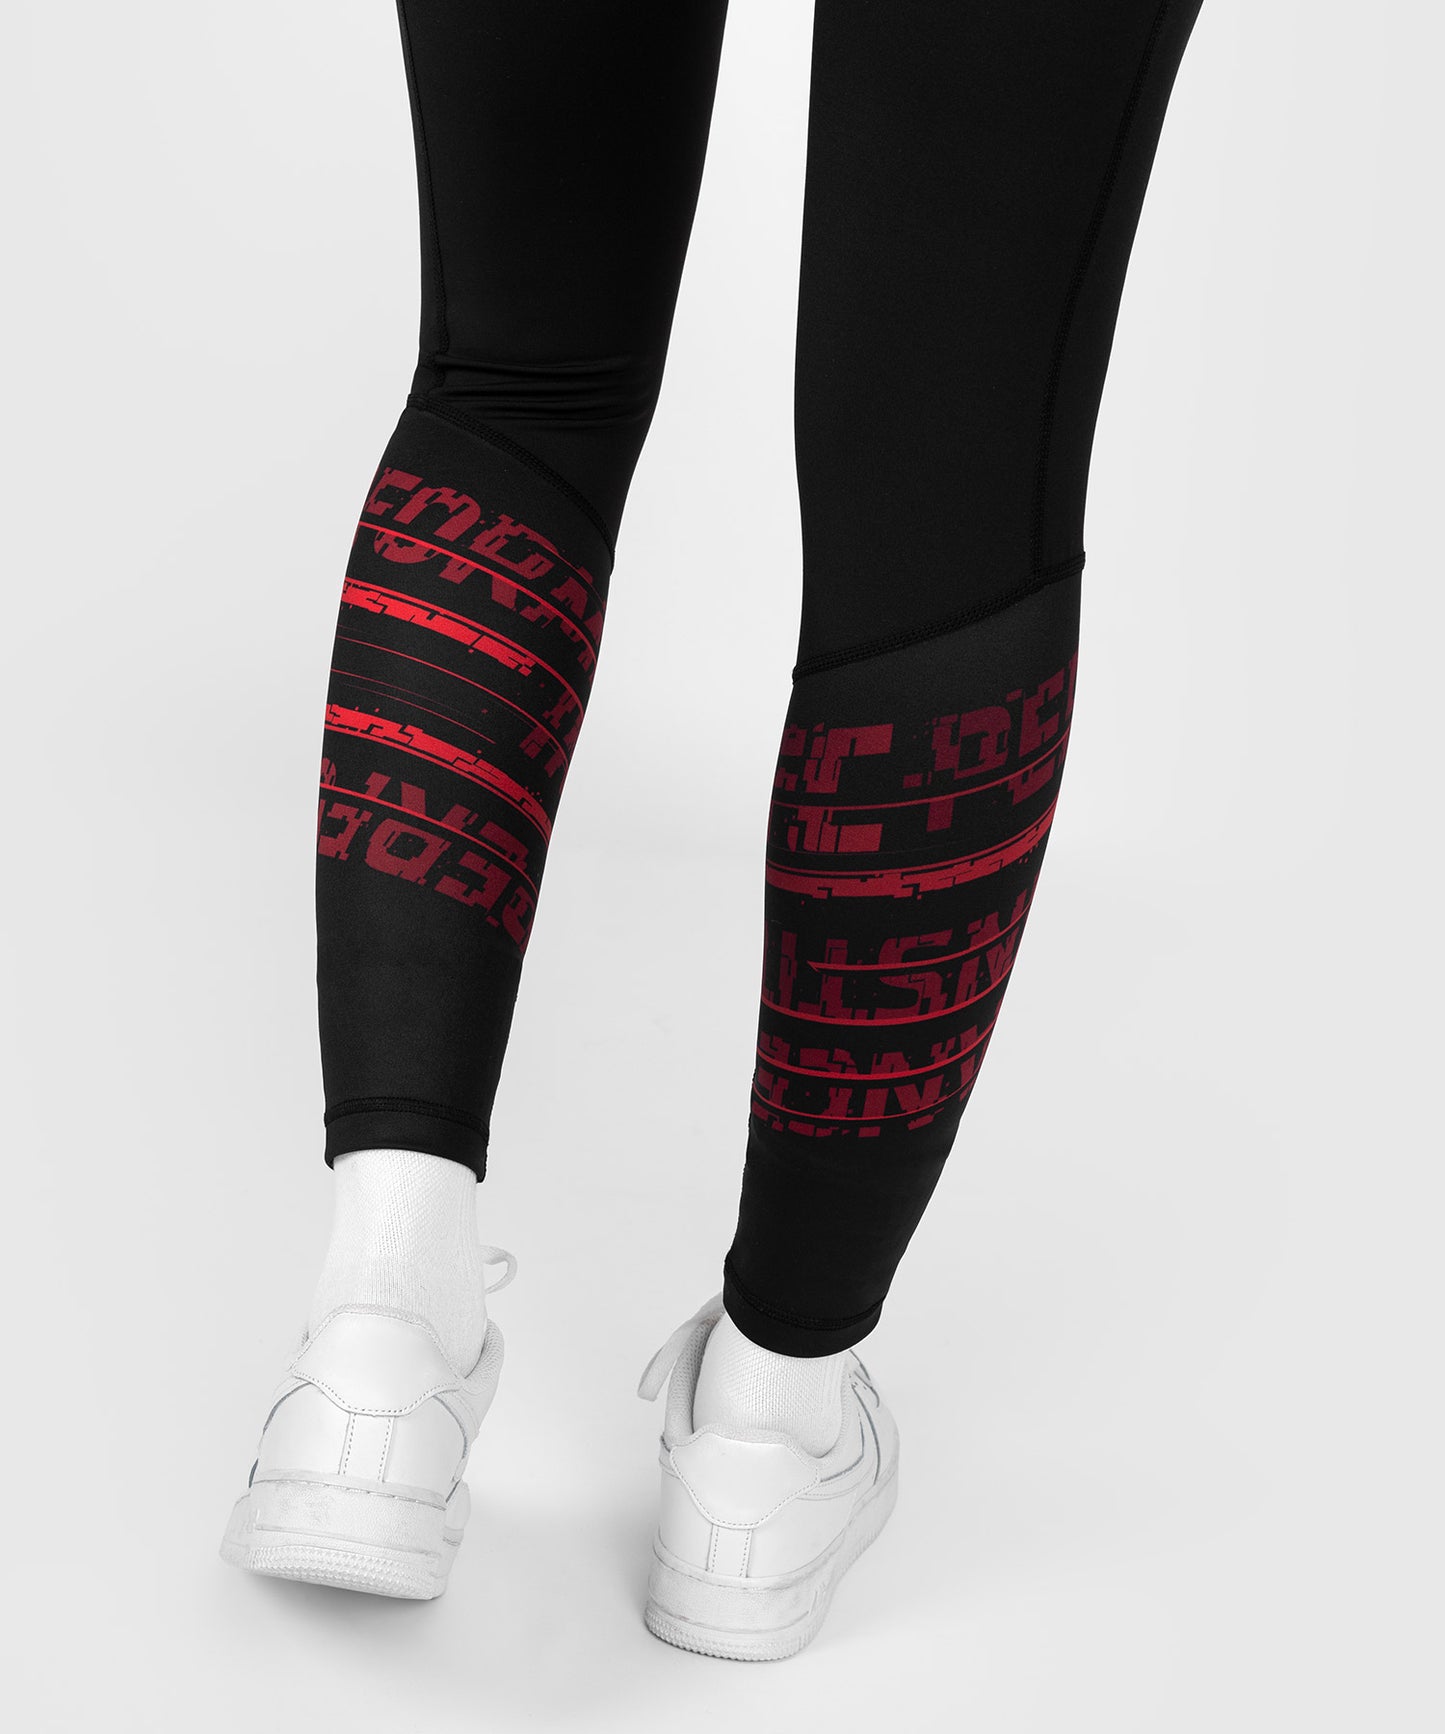 UFC Performance Institute 2.0 Women’s Performance Tight - Black/Red